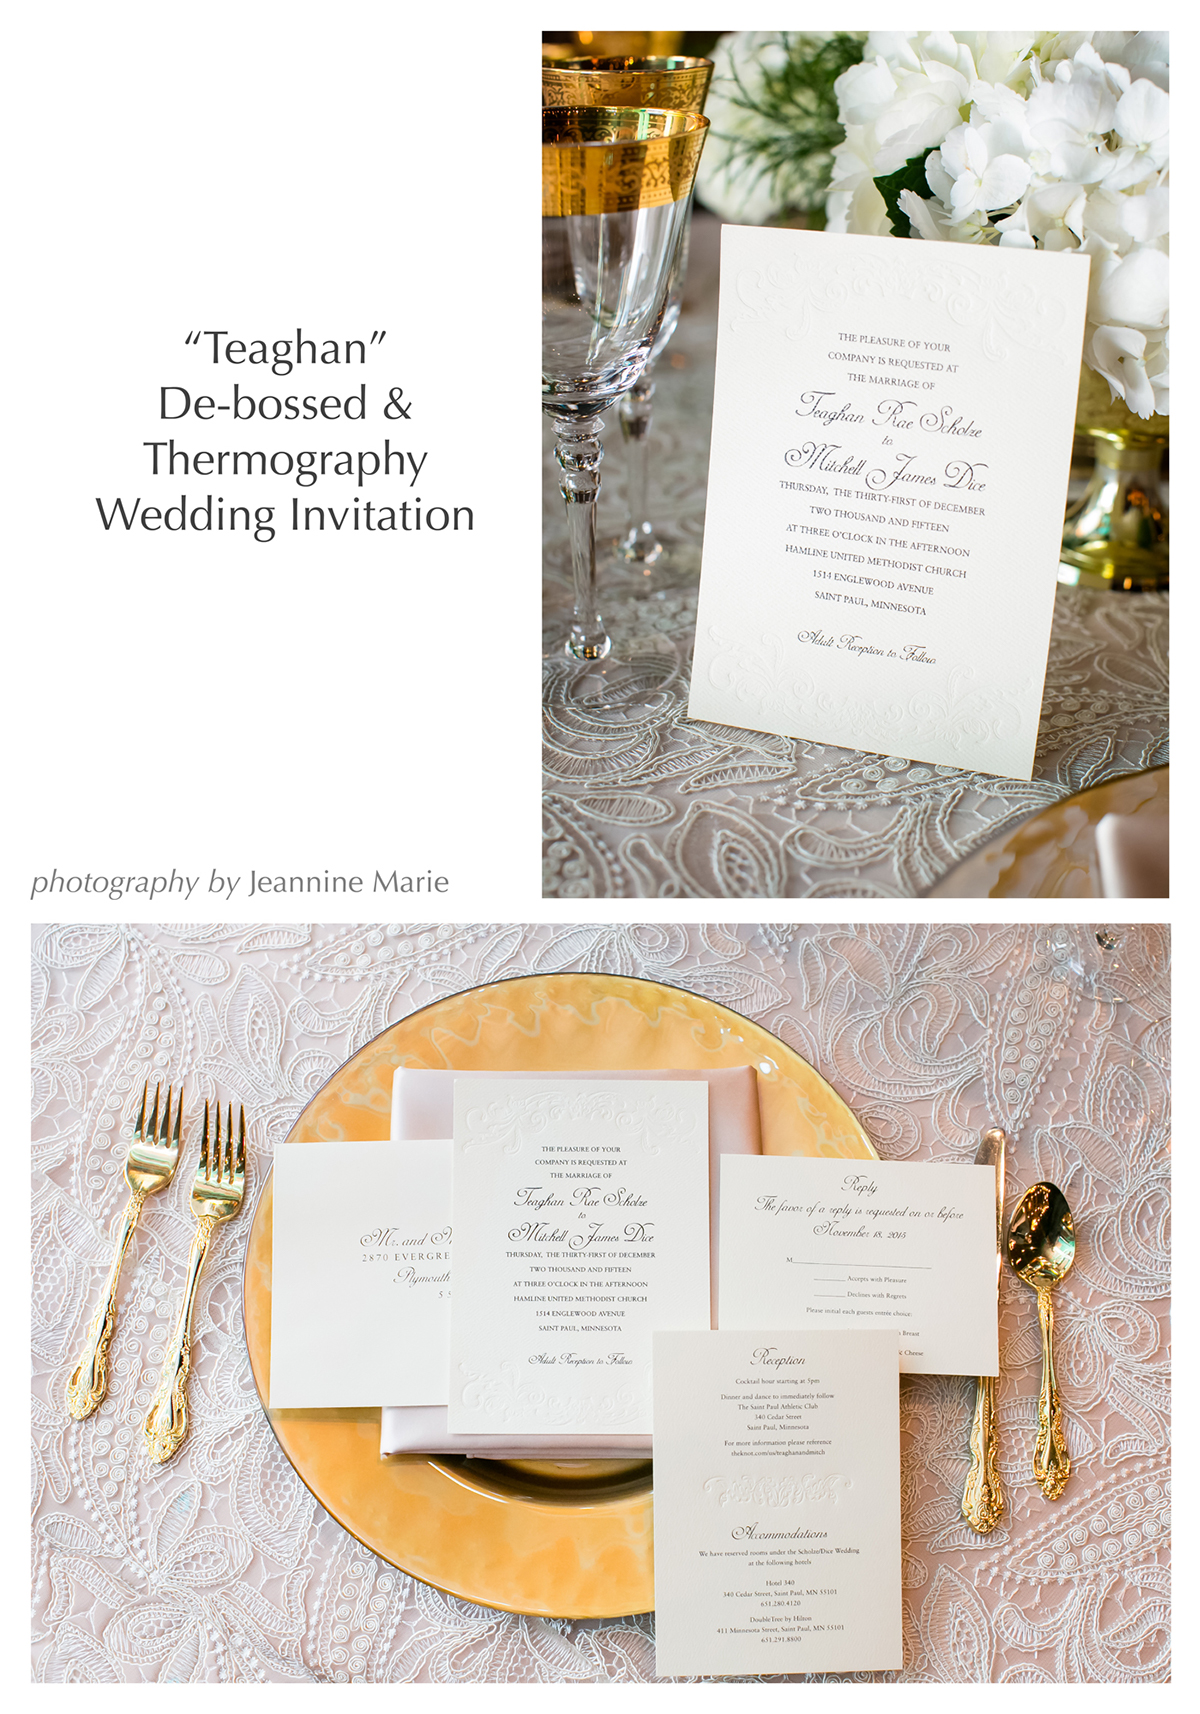 personal stationery wedding invitations elegant upscale embossed debossed thermography printing